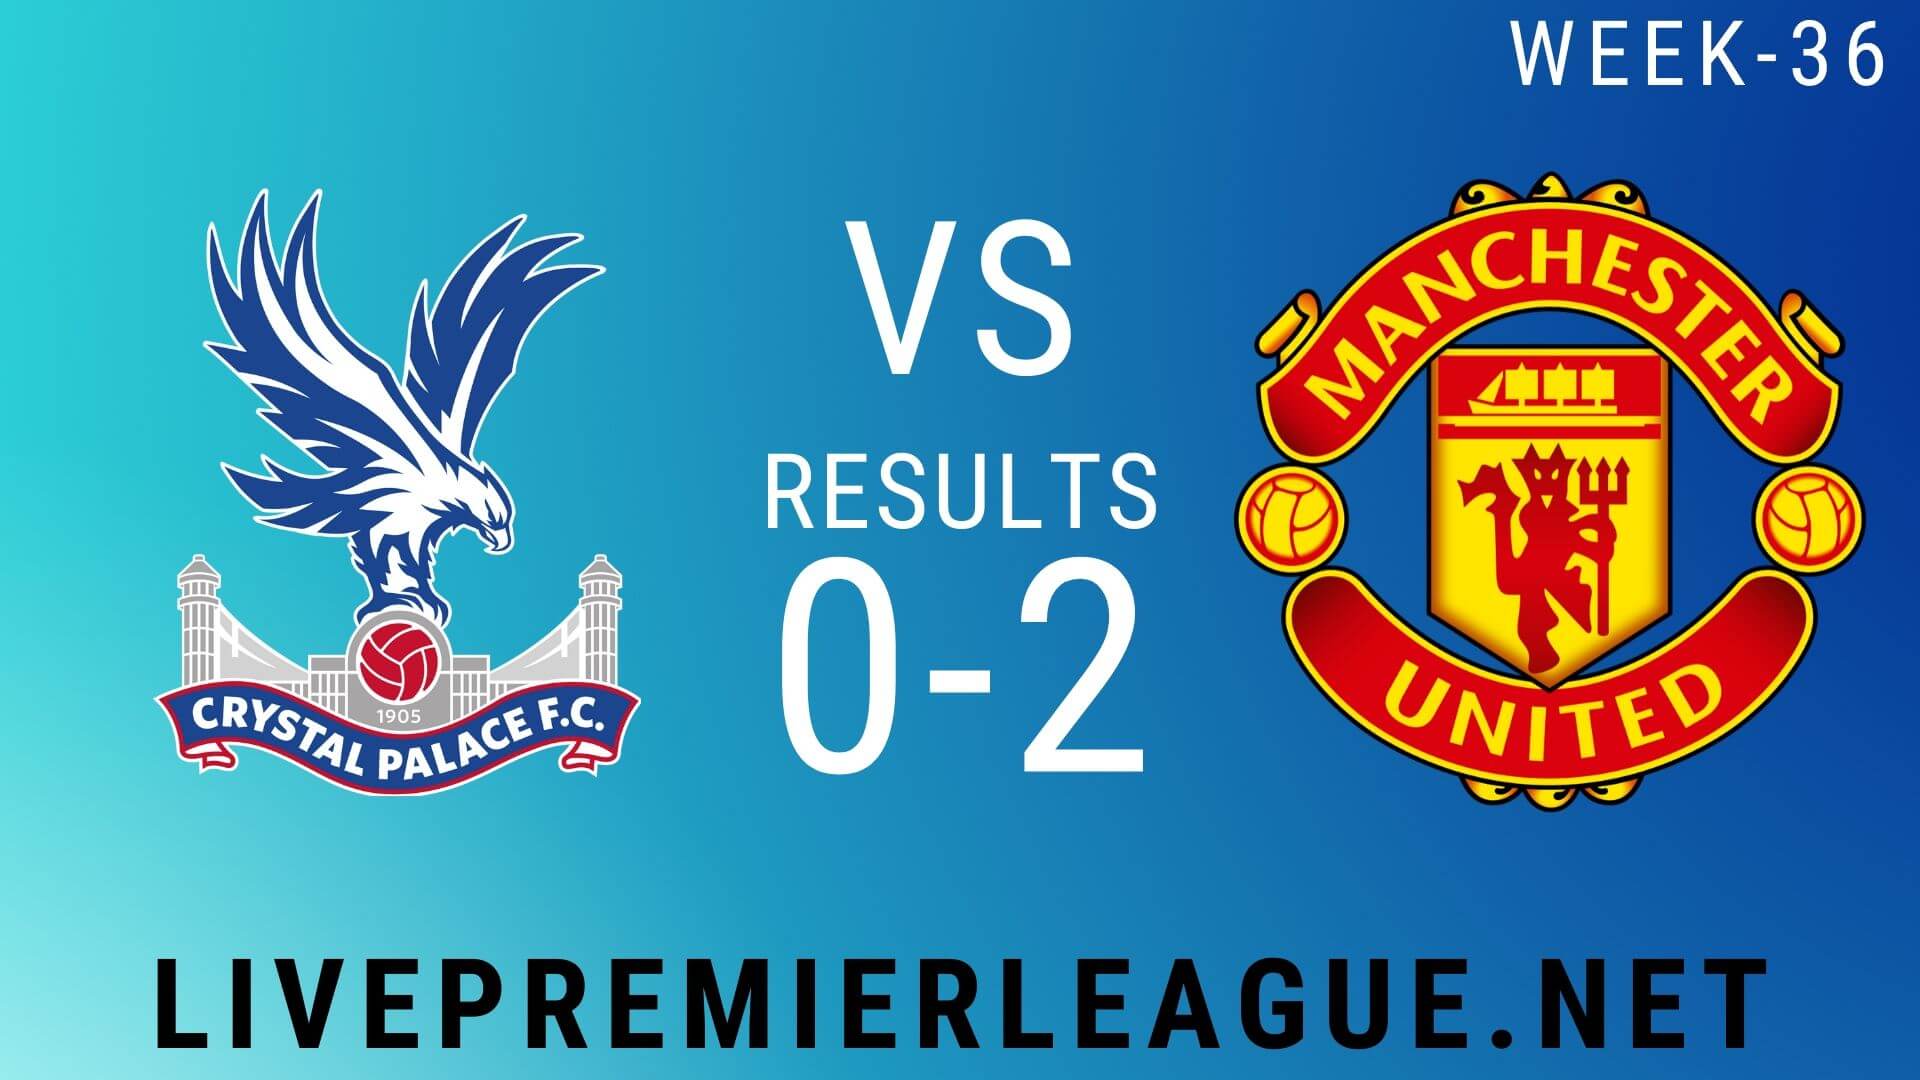 Crystal Palace Vs Manchester United | Week 36 Result 2020